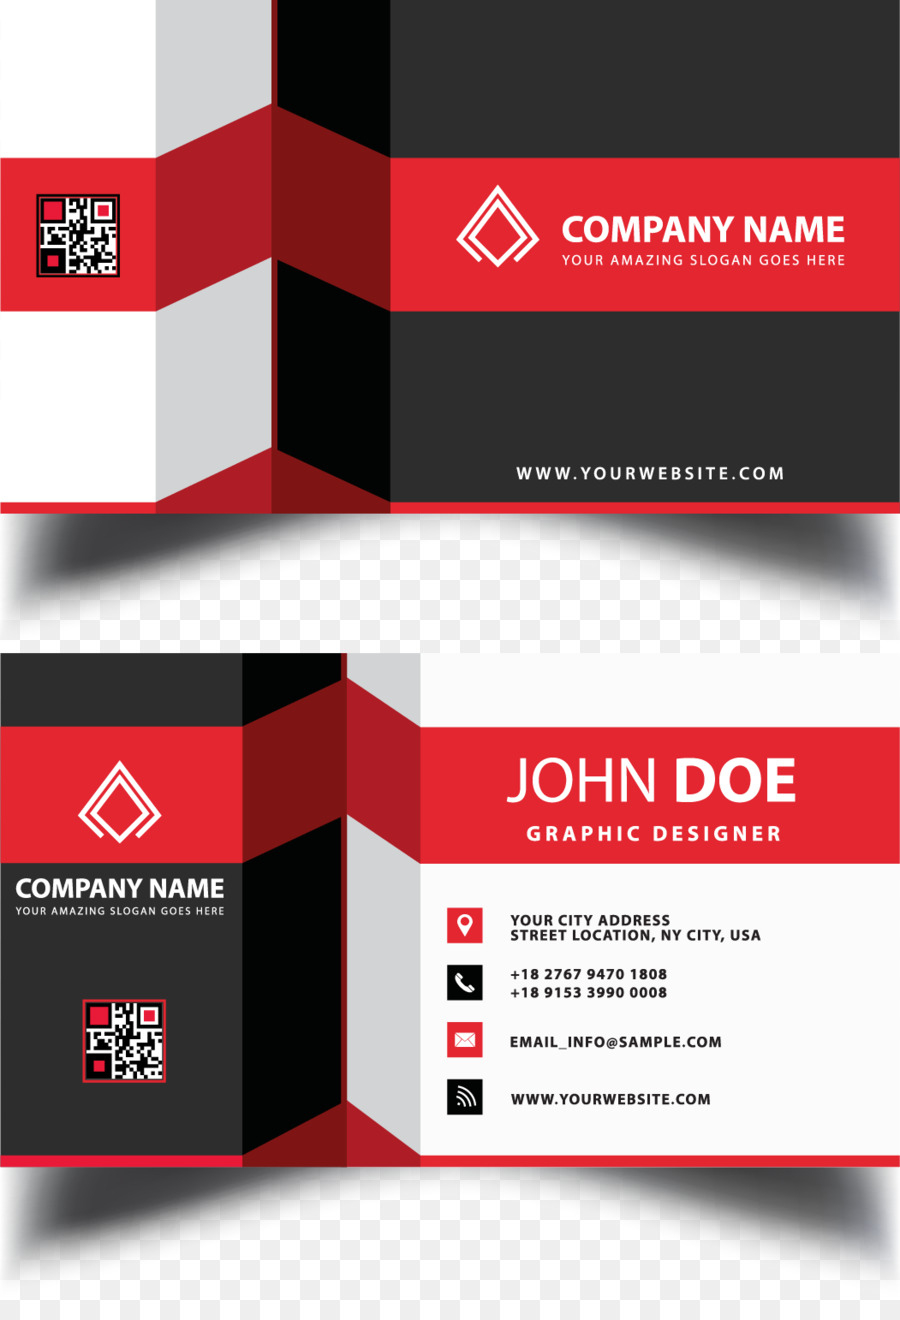 Business Card Visiting Card Graphic Design - Business Visiting Card Design , HD Wallpaper & Backgrounds